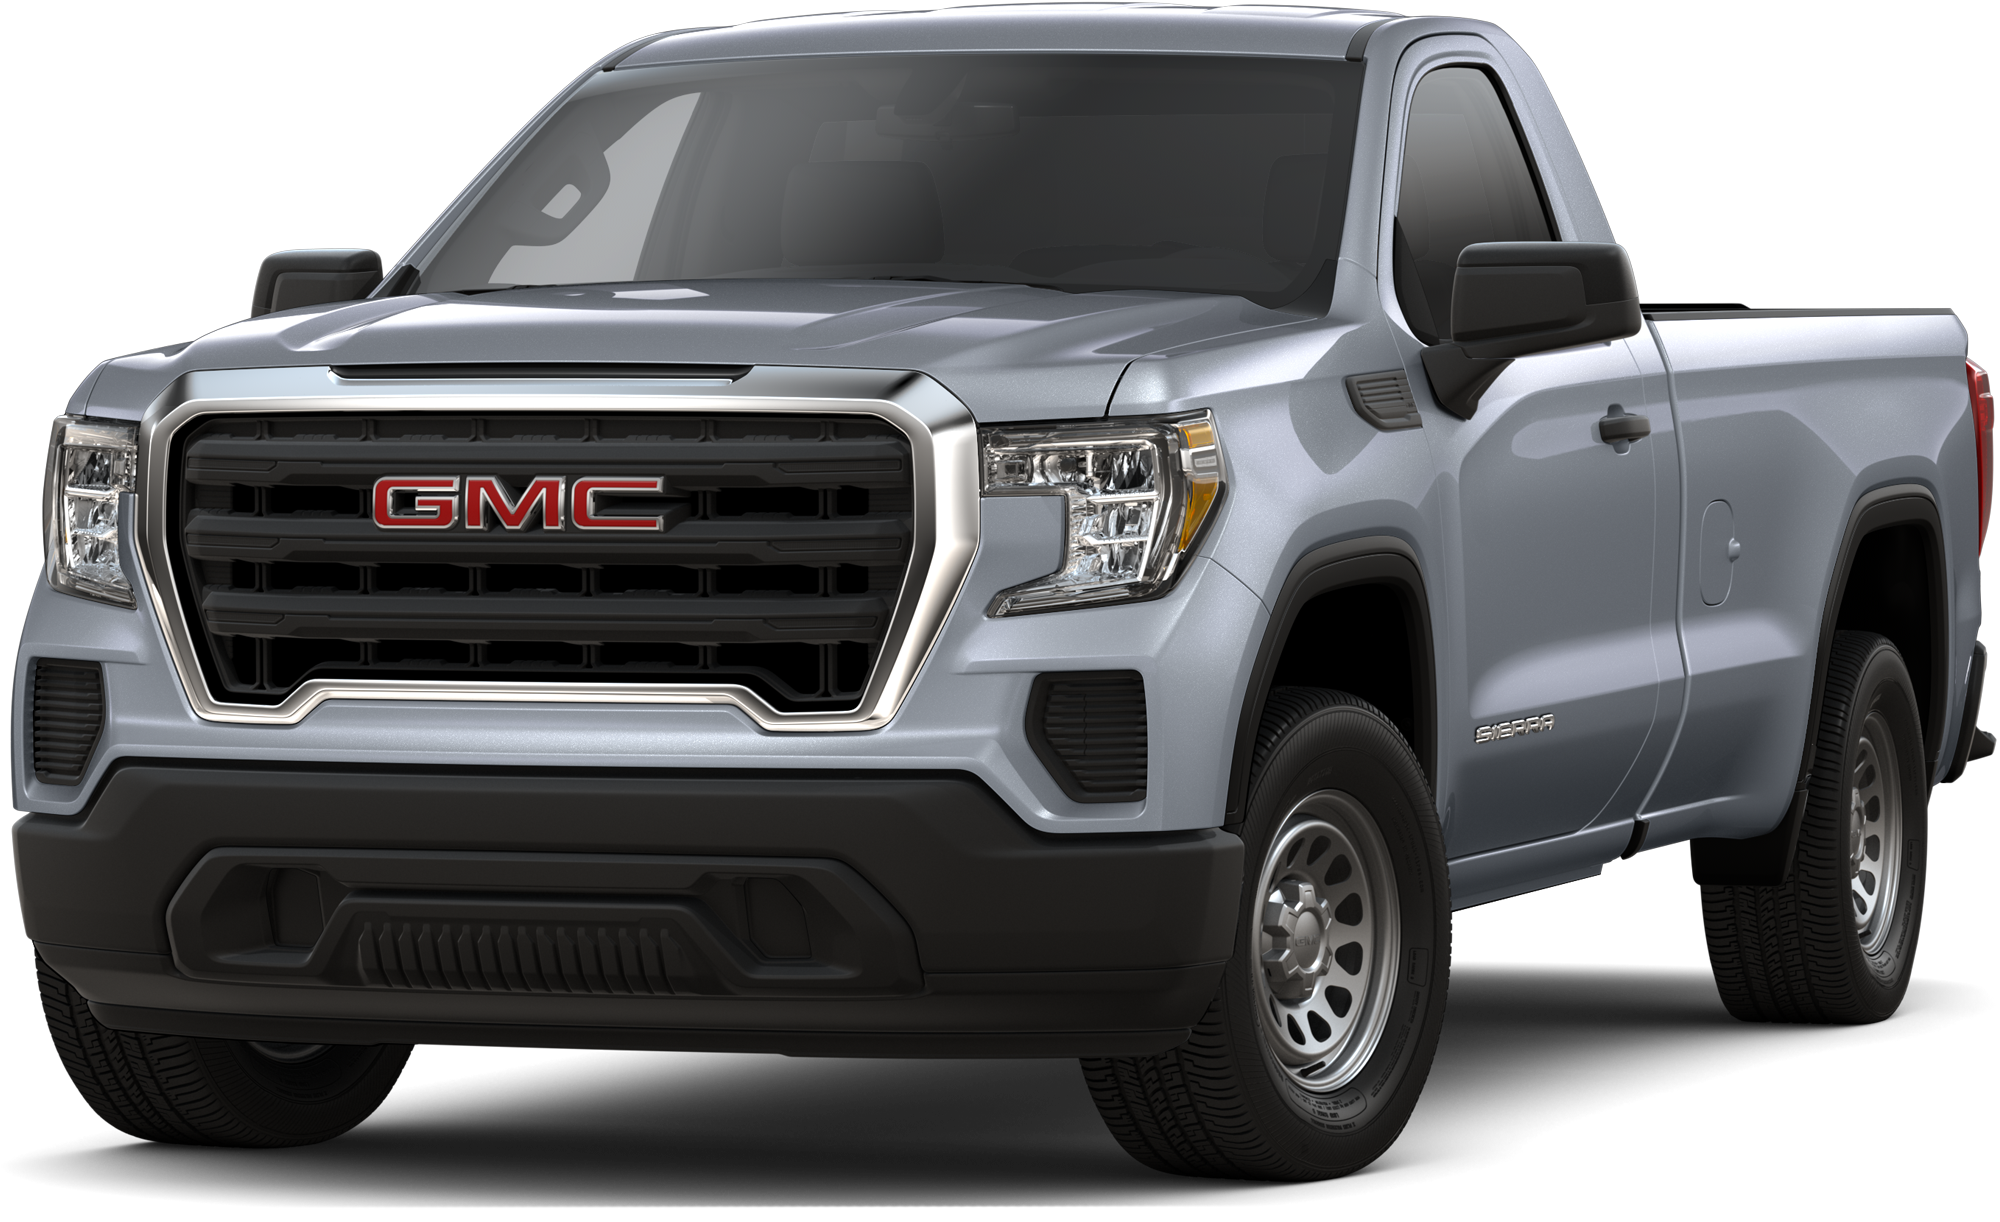 2019-gmc-sierra-1500-incentives-specials-offers-in-augusta-me